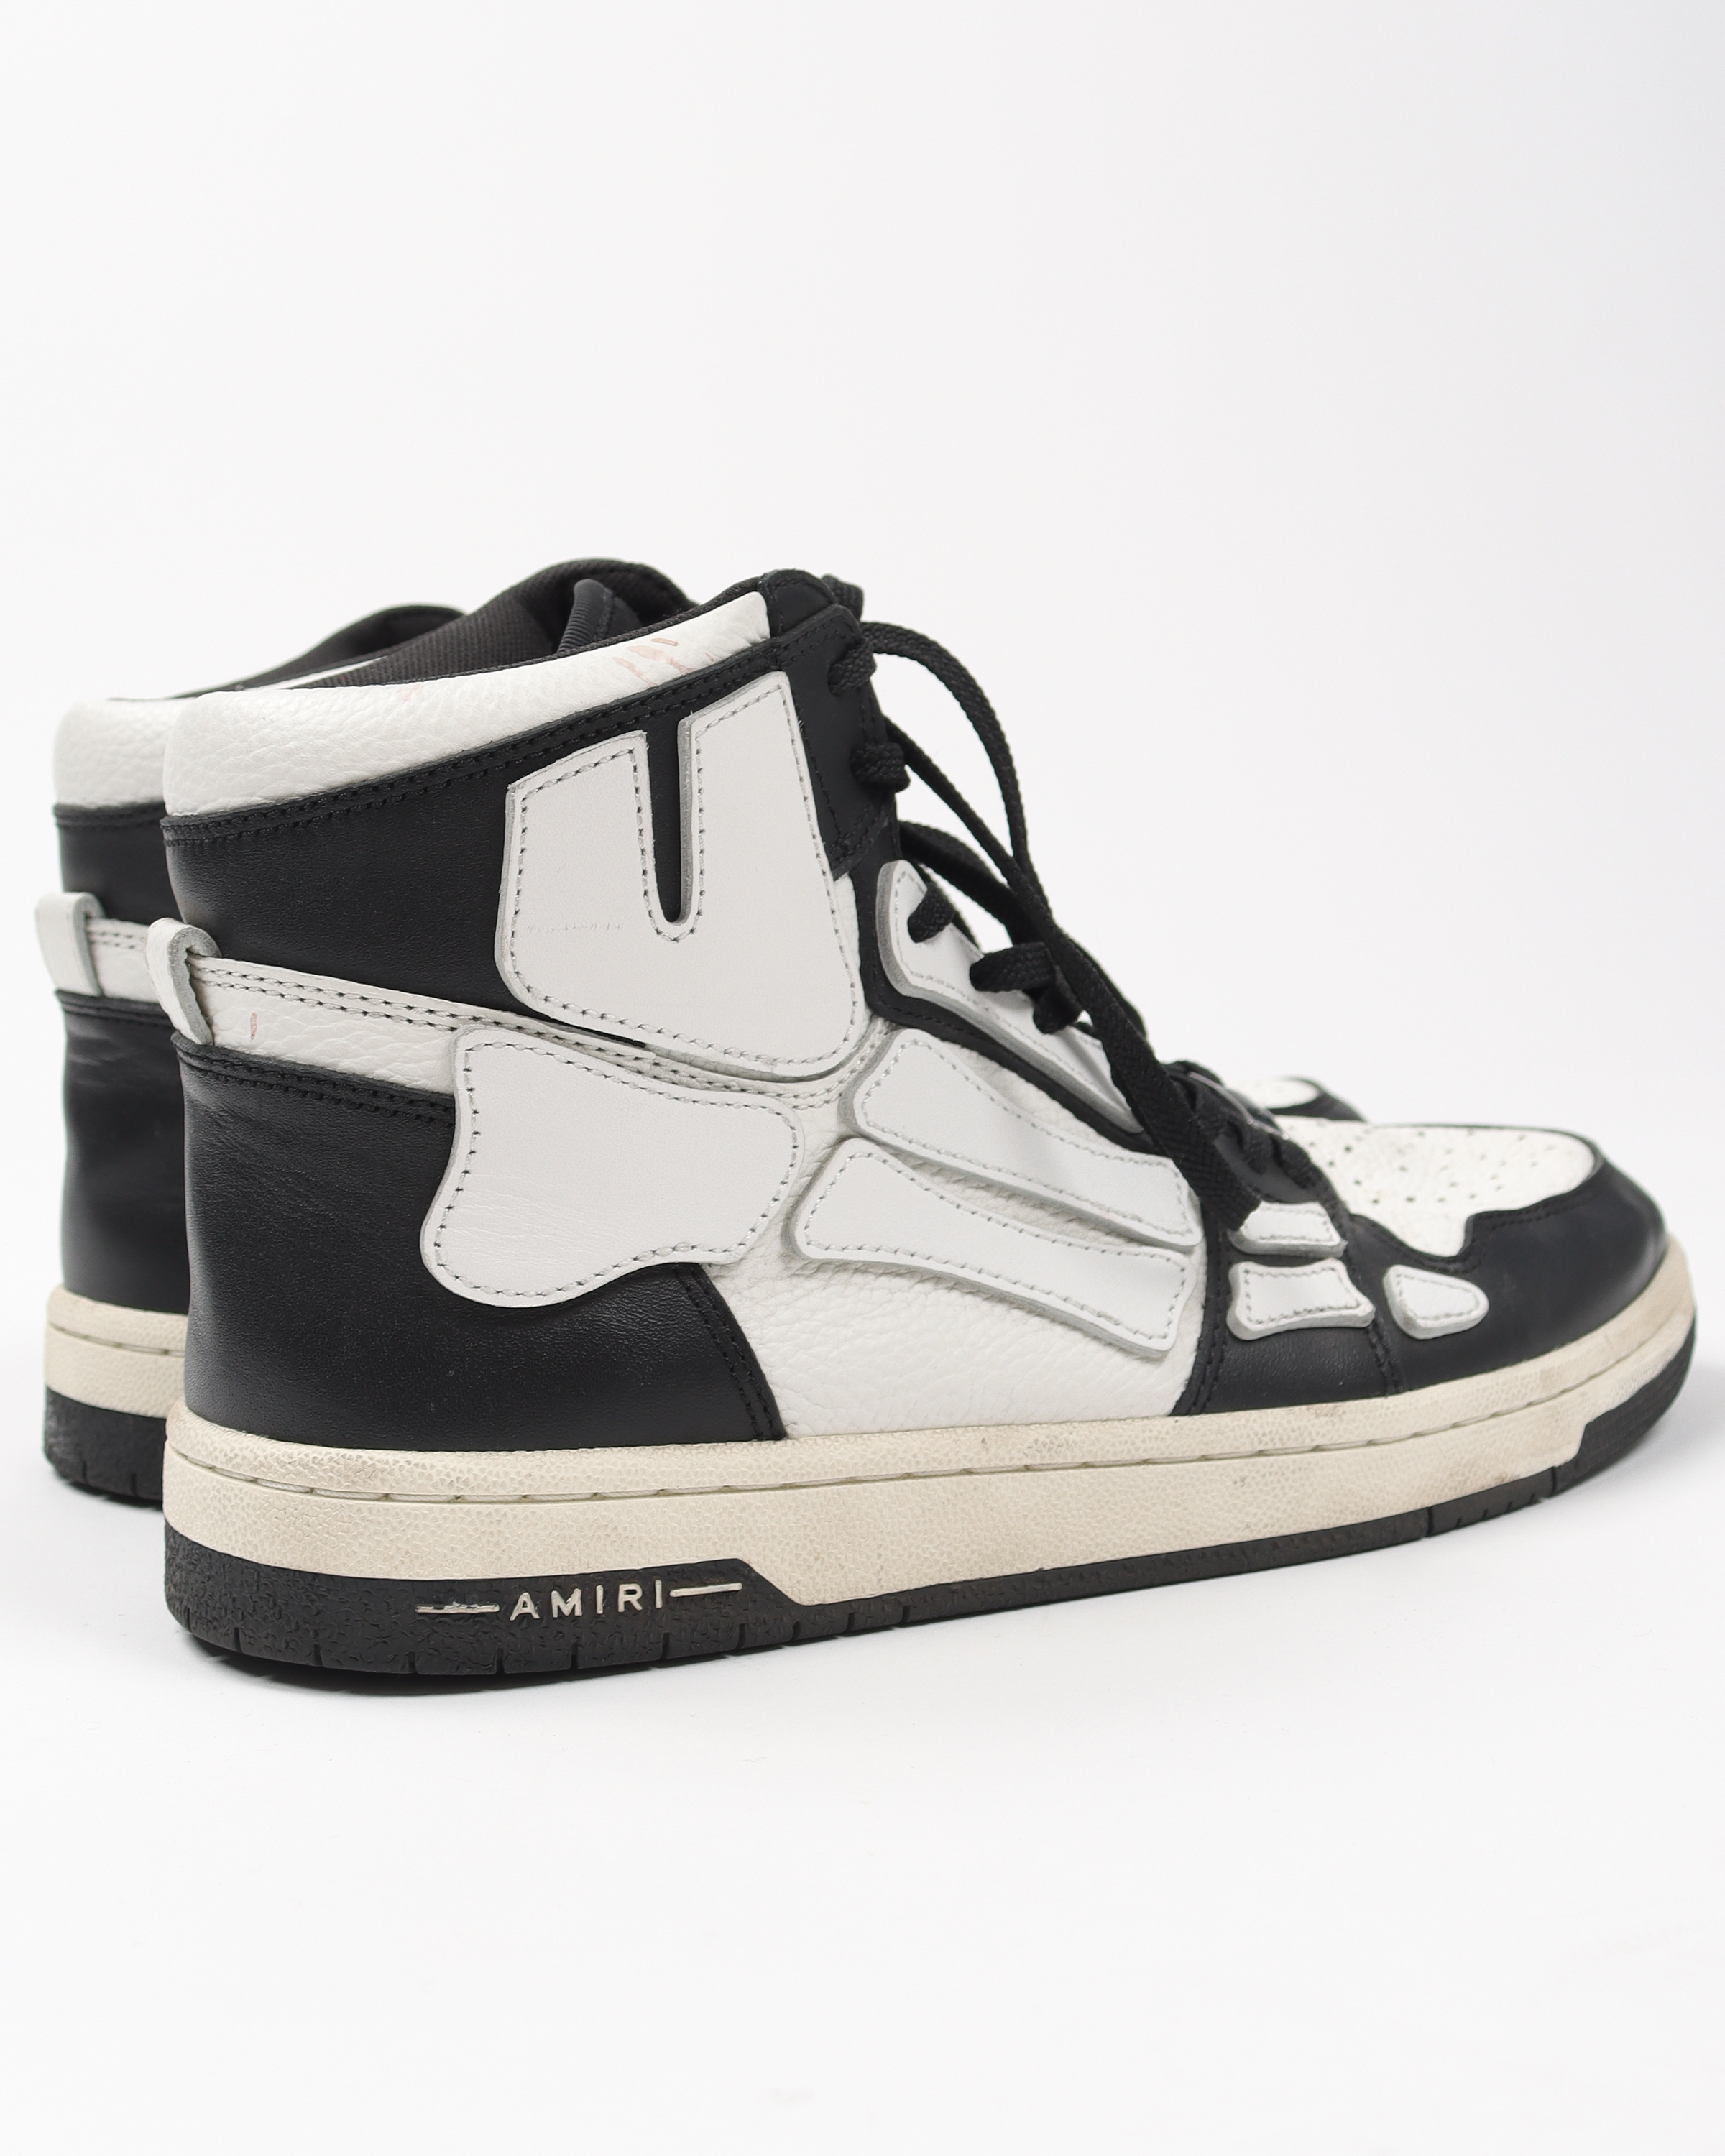 Black and White Skeleton High-Top Sneakers